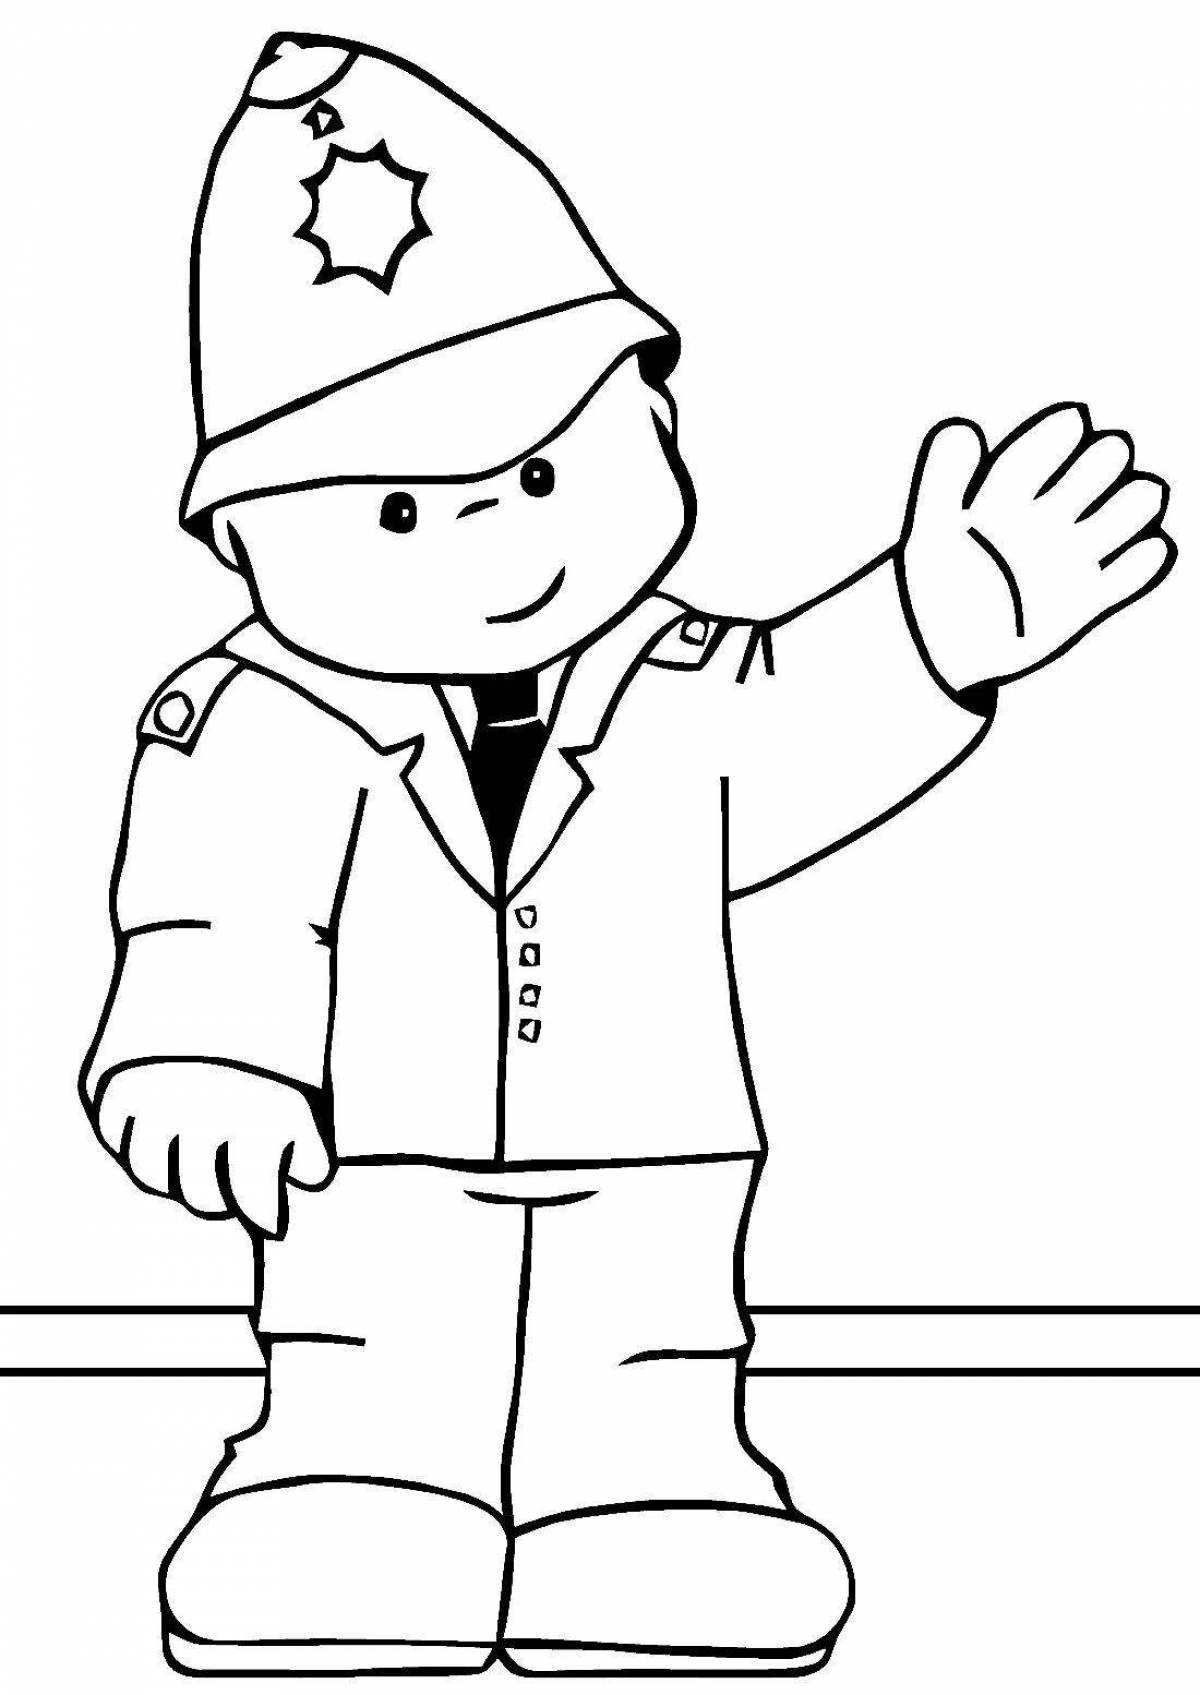 Coloring book shiny military profession